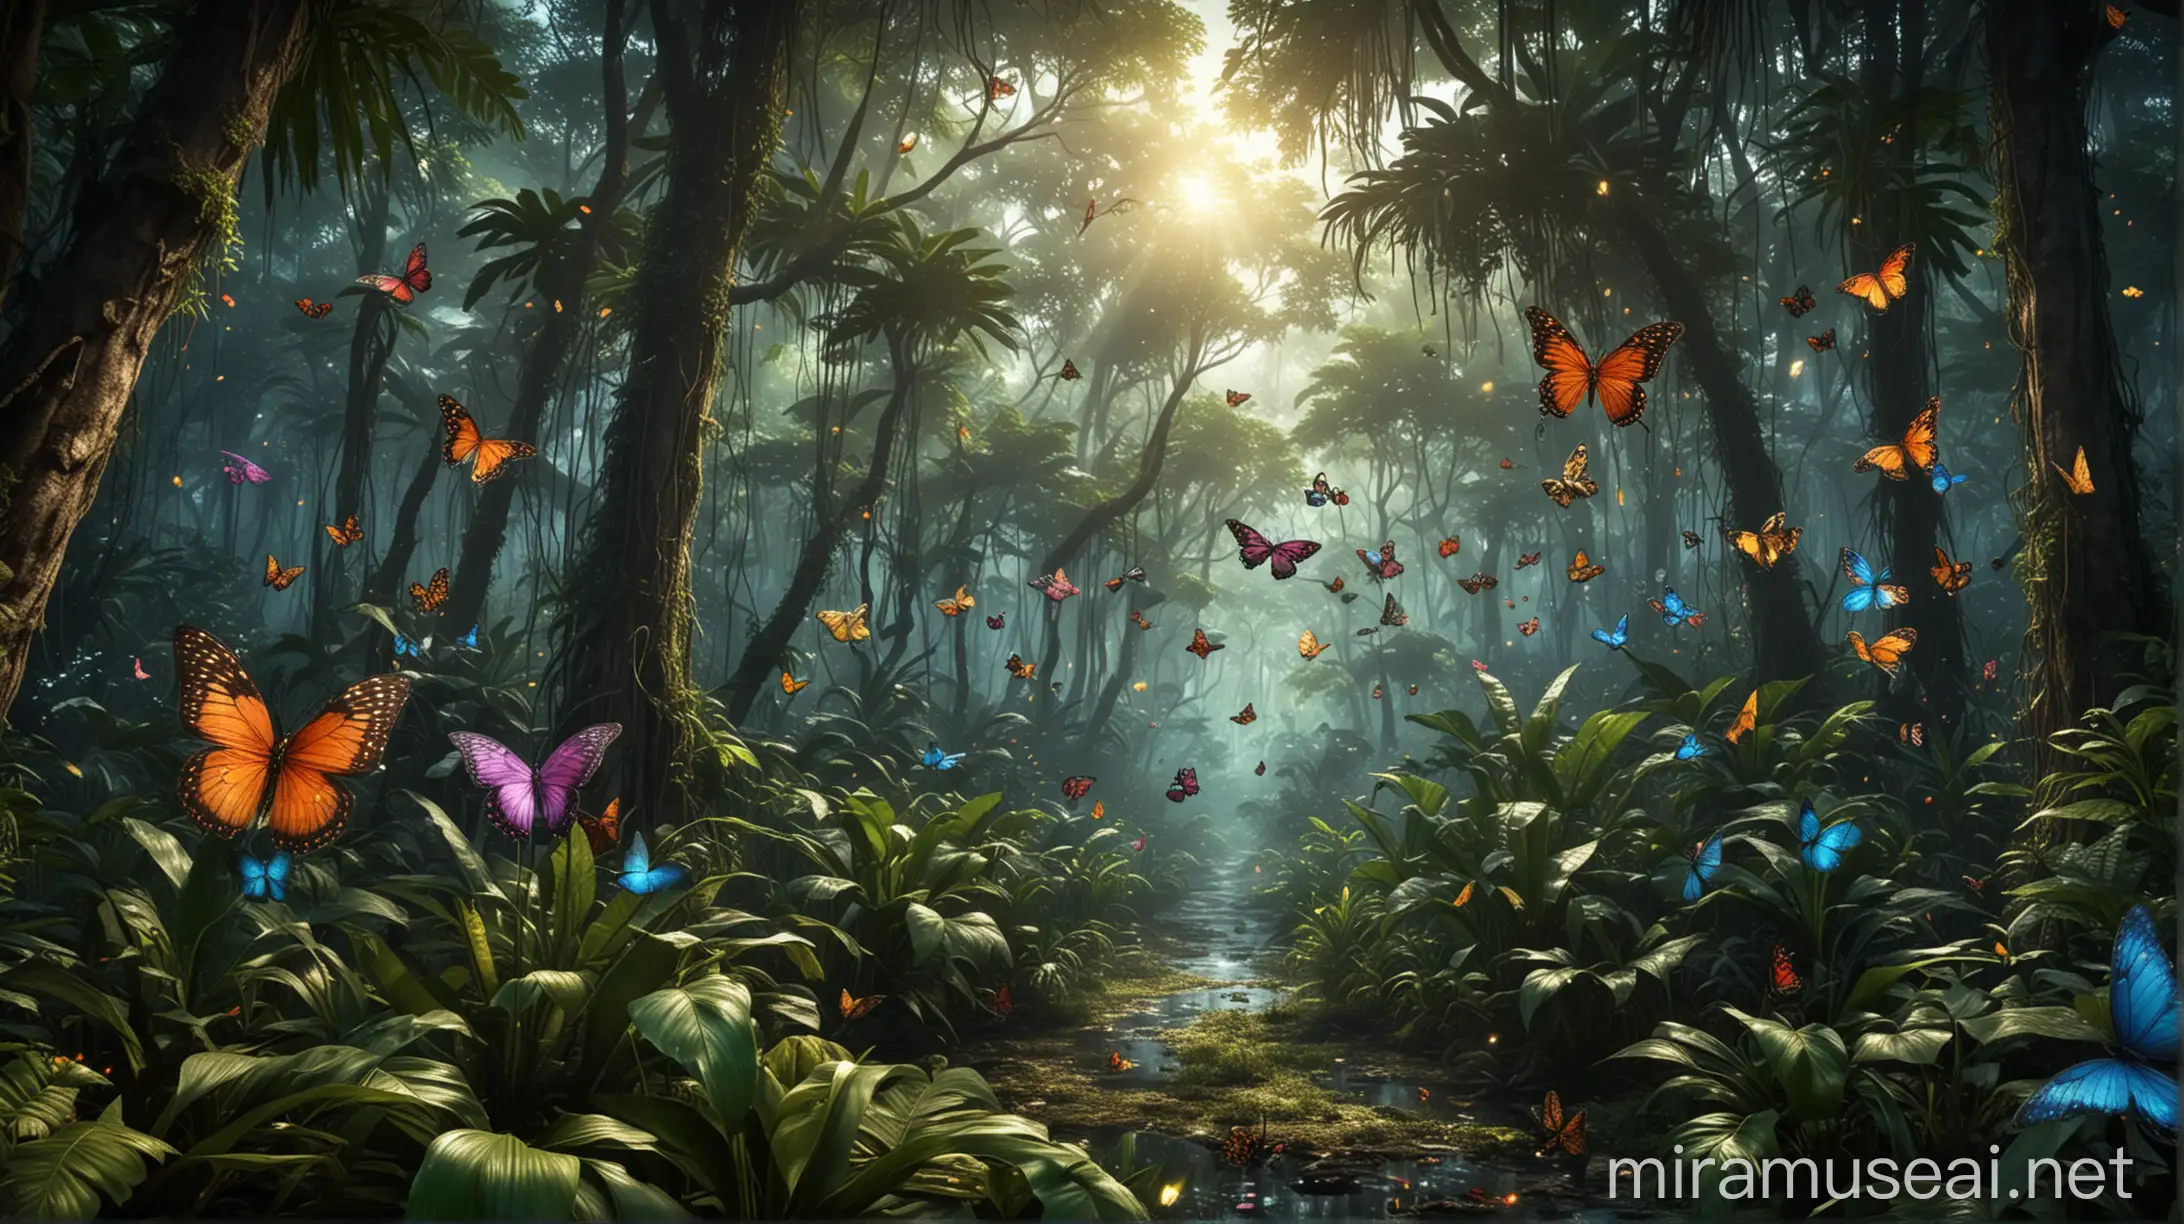 World of fantasy Full of butterflies and fireflies flying in the background cool tropical forest, ultra realistic HDR extreme